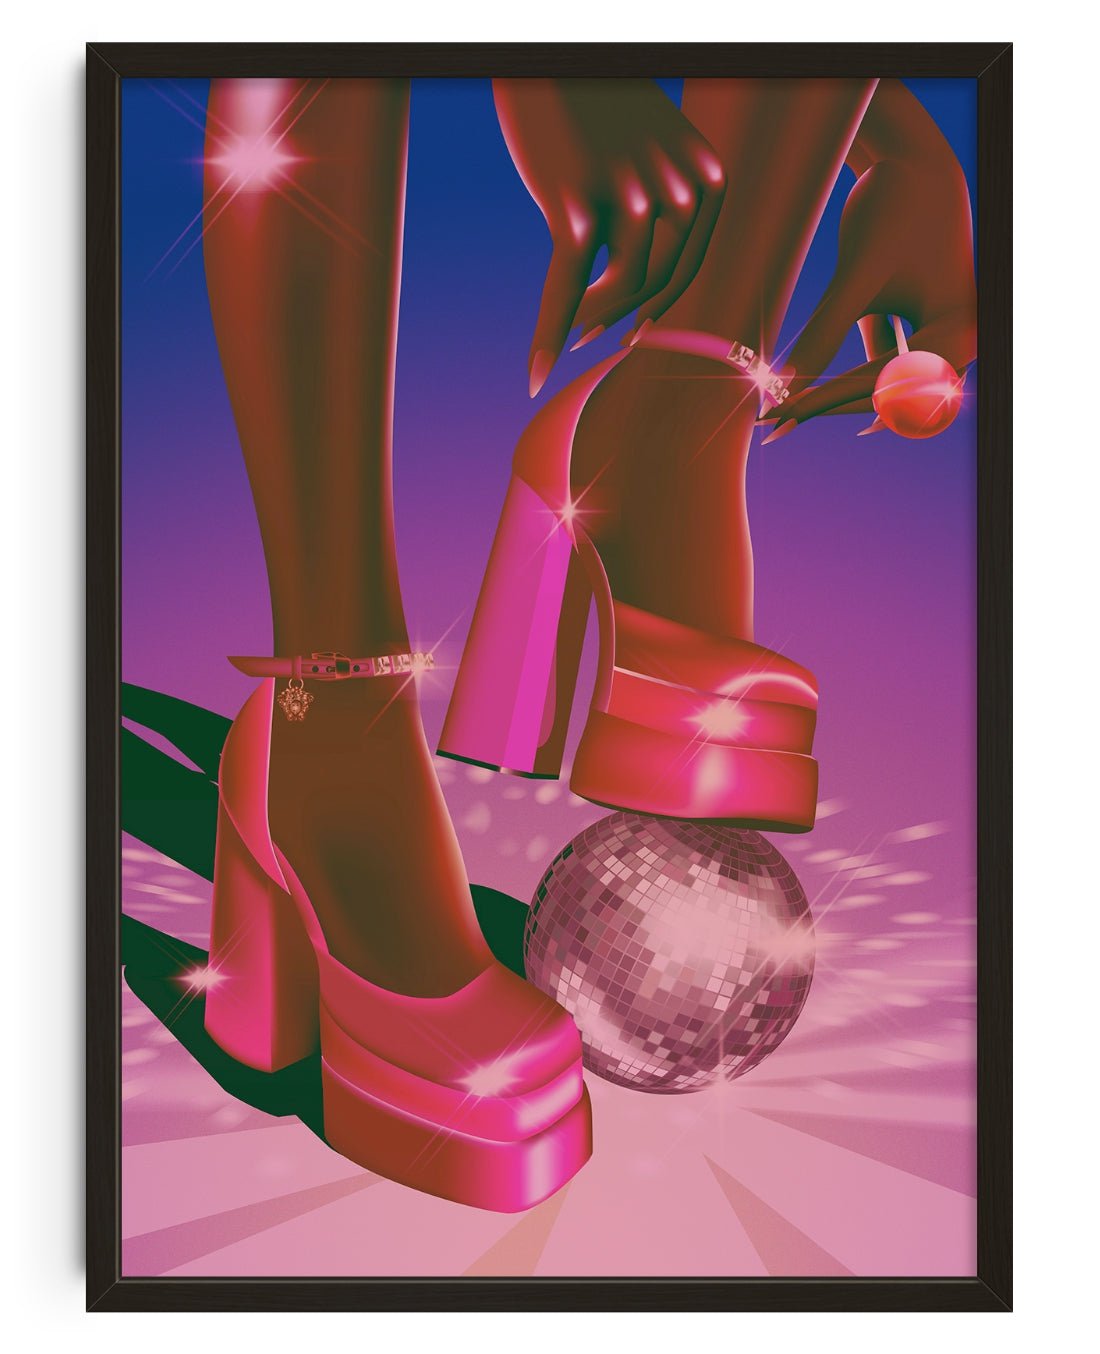 Disco Shoes contemporary wall art print by Paulina Almira - sold by DROOL